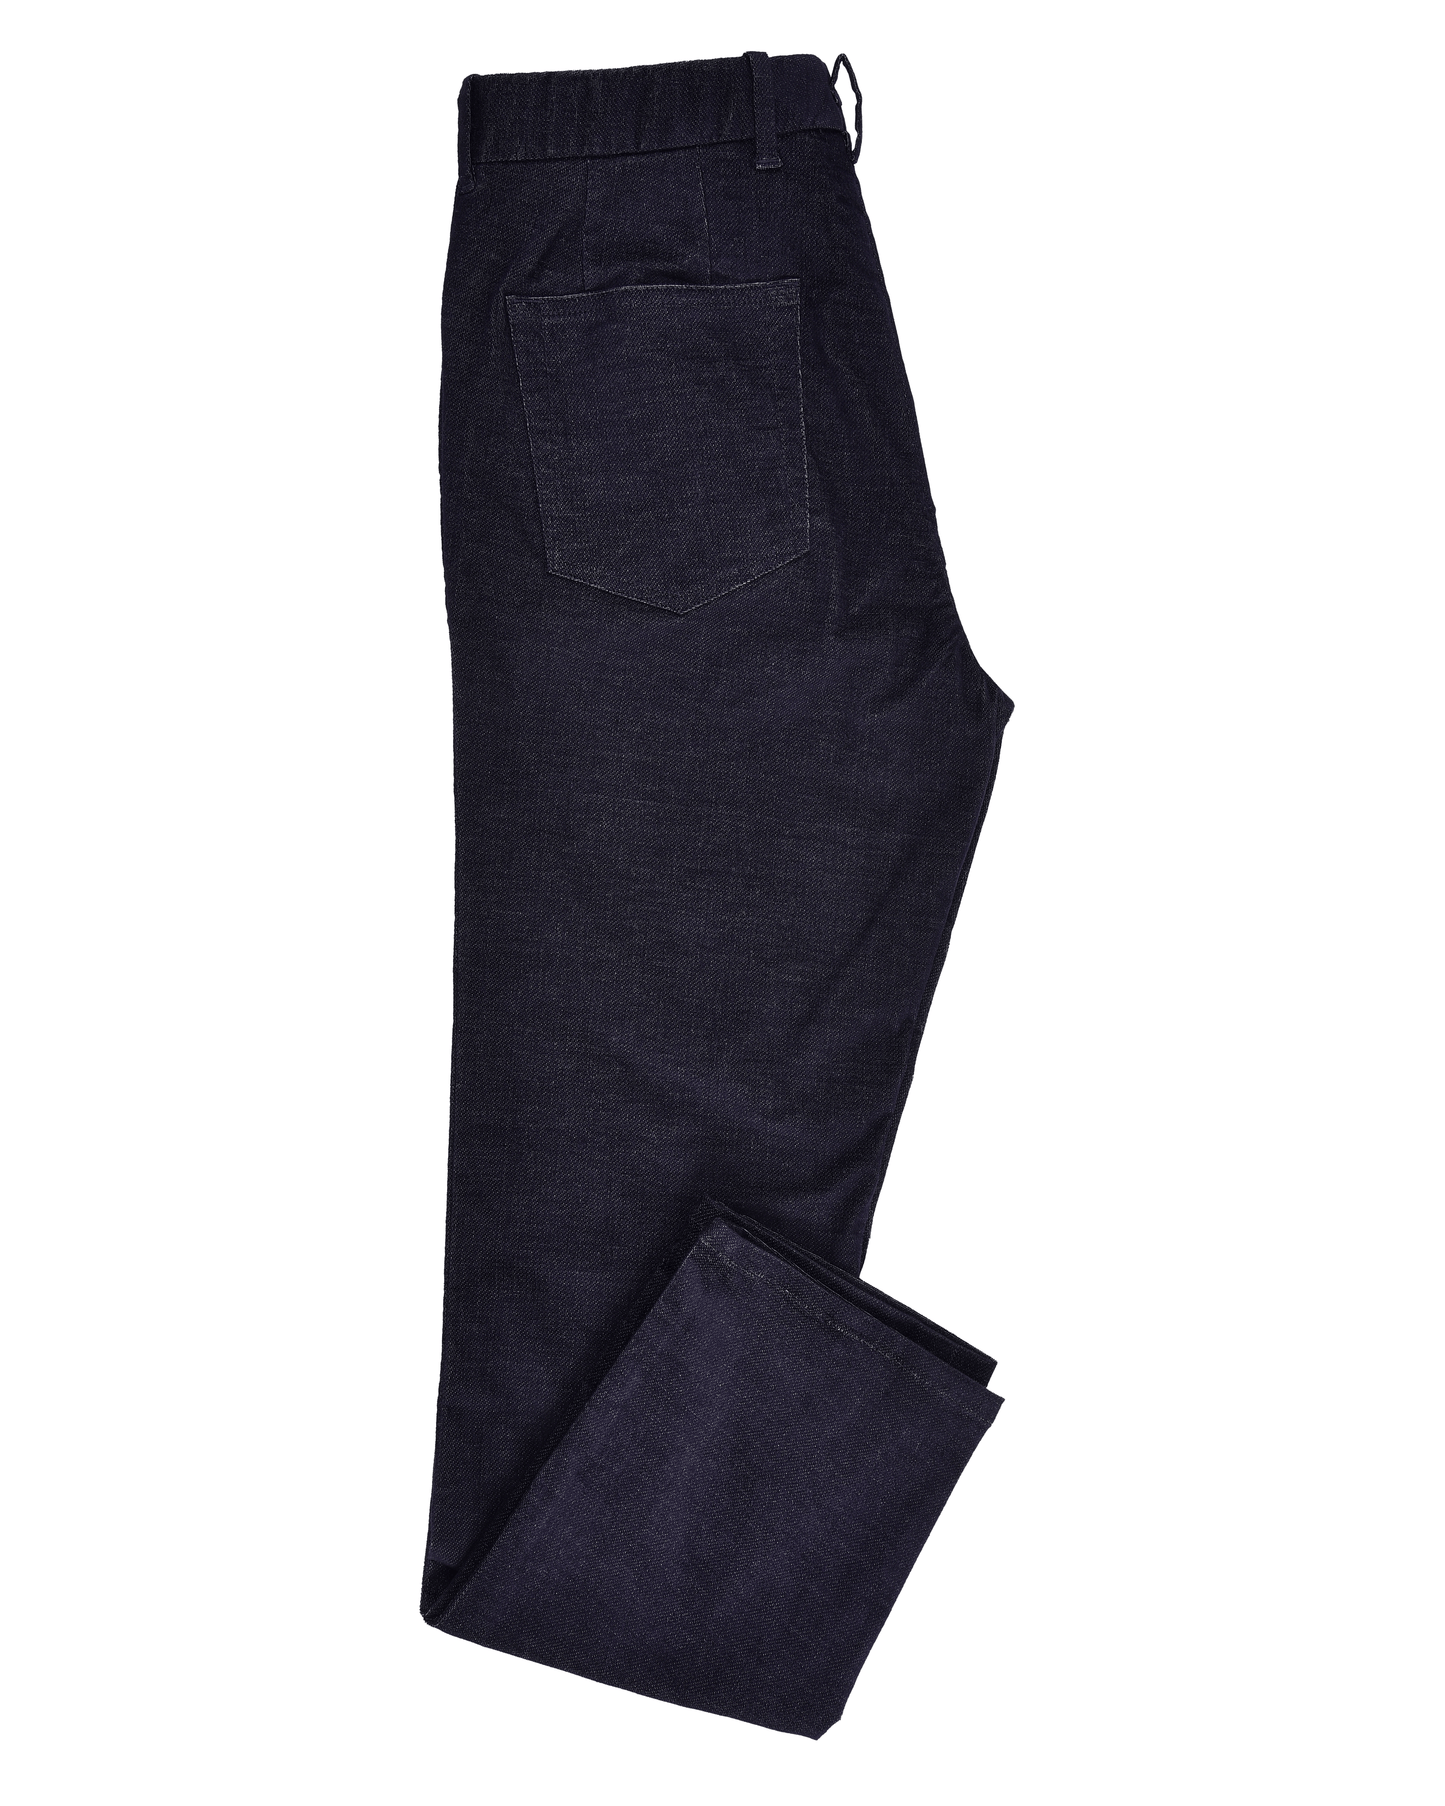 Side view of 4-way stretch jeans for men by Luxire in indigo